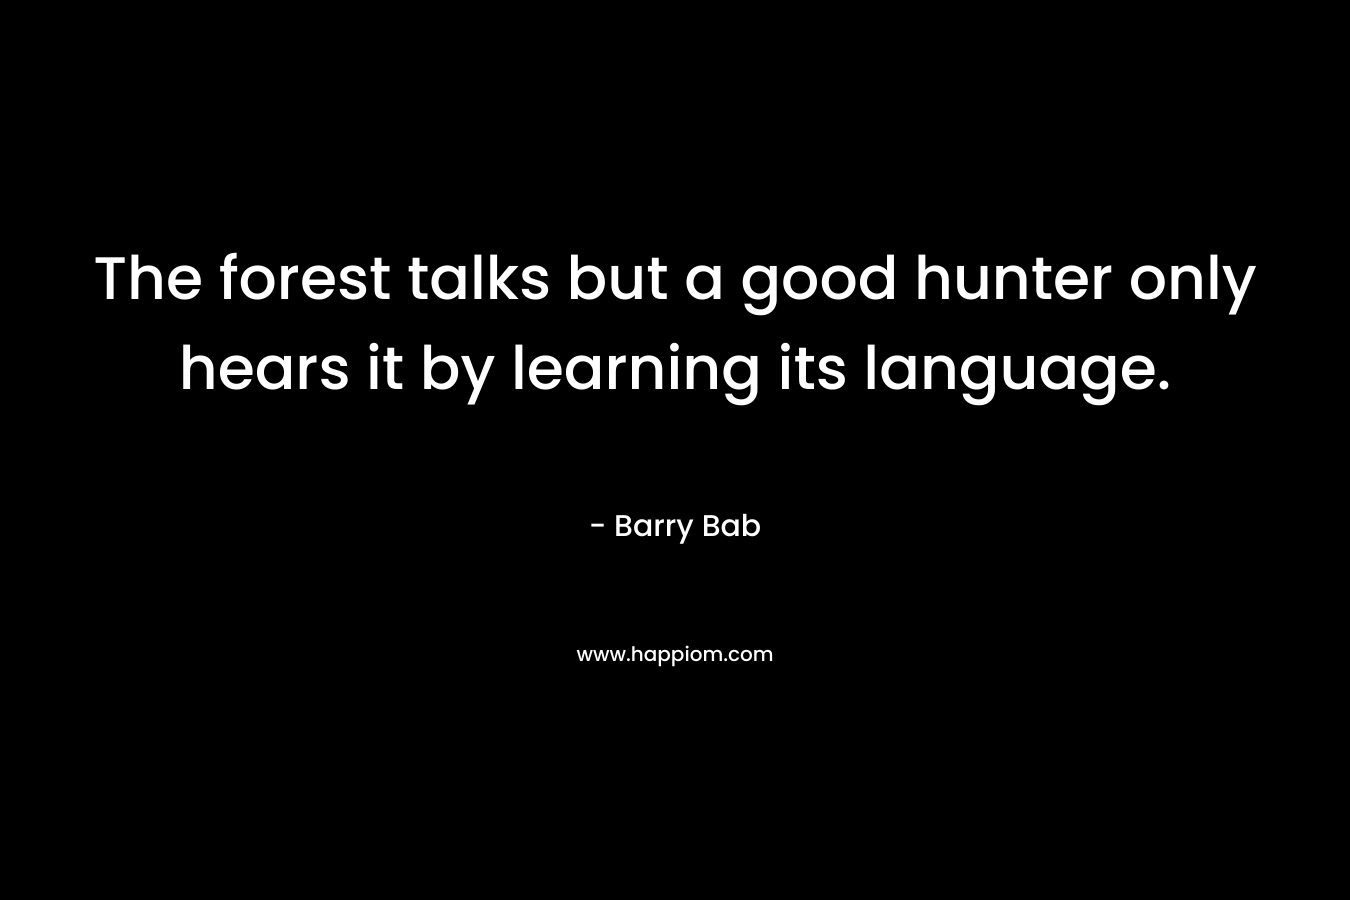 The forest talks but a good hunter only hears it by learning its language.